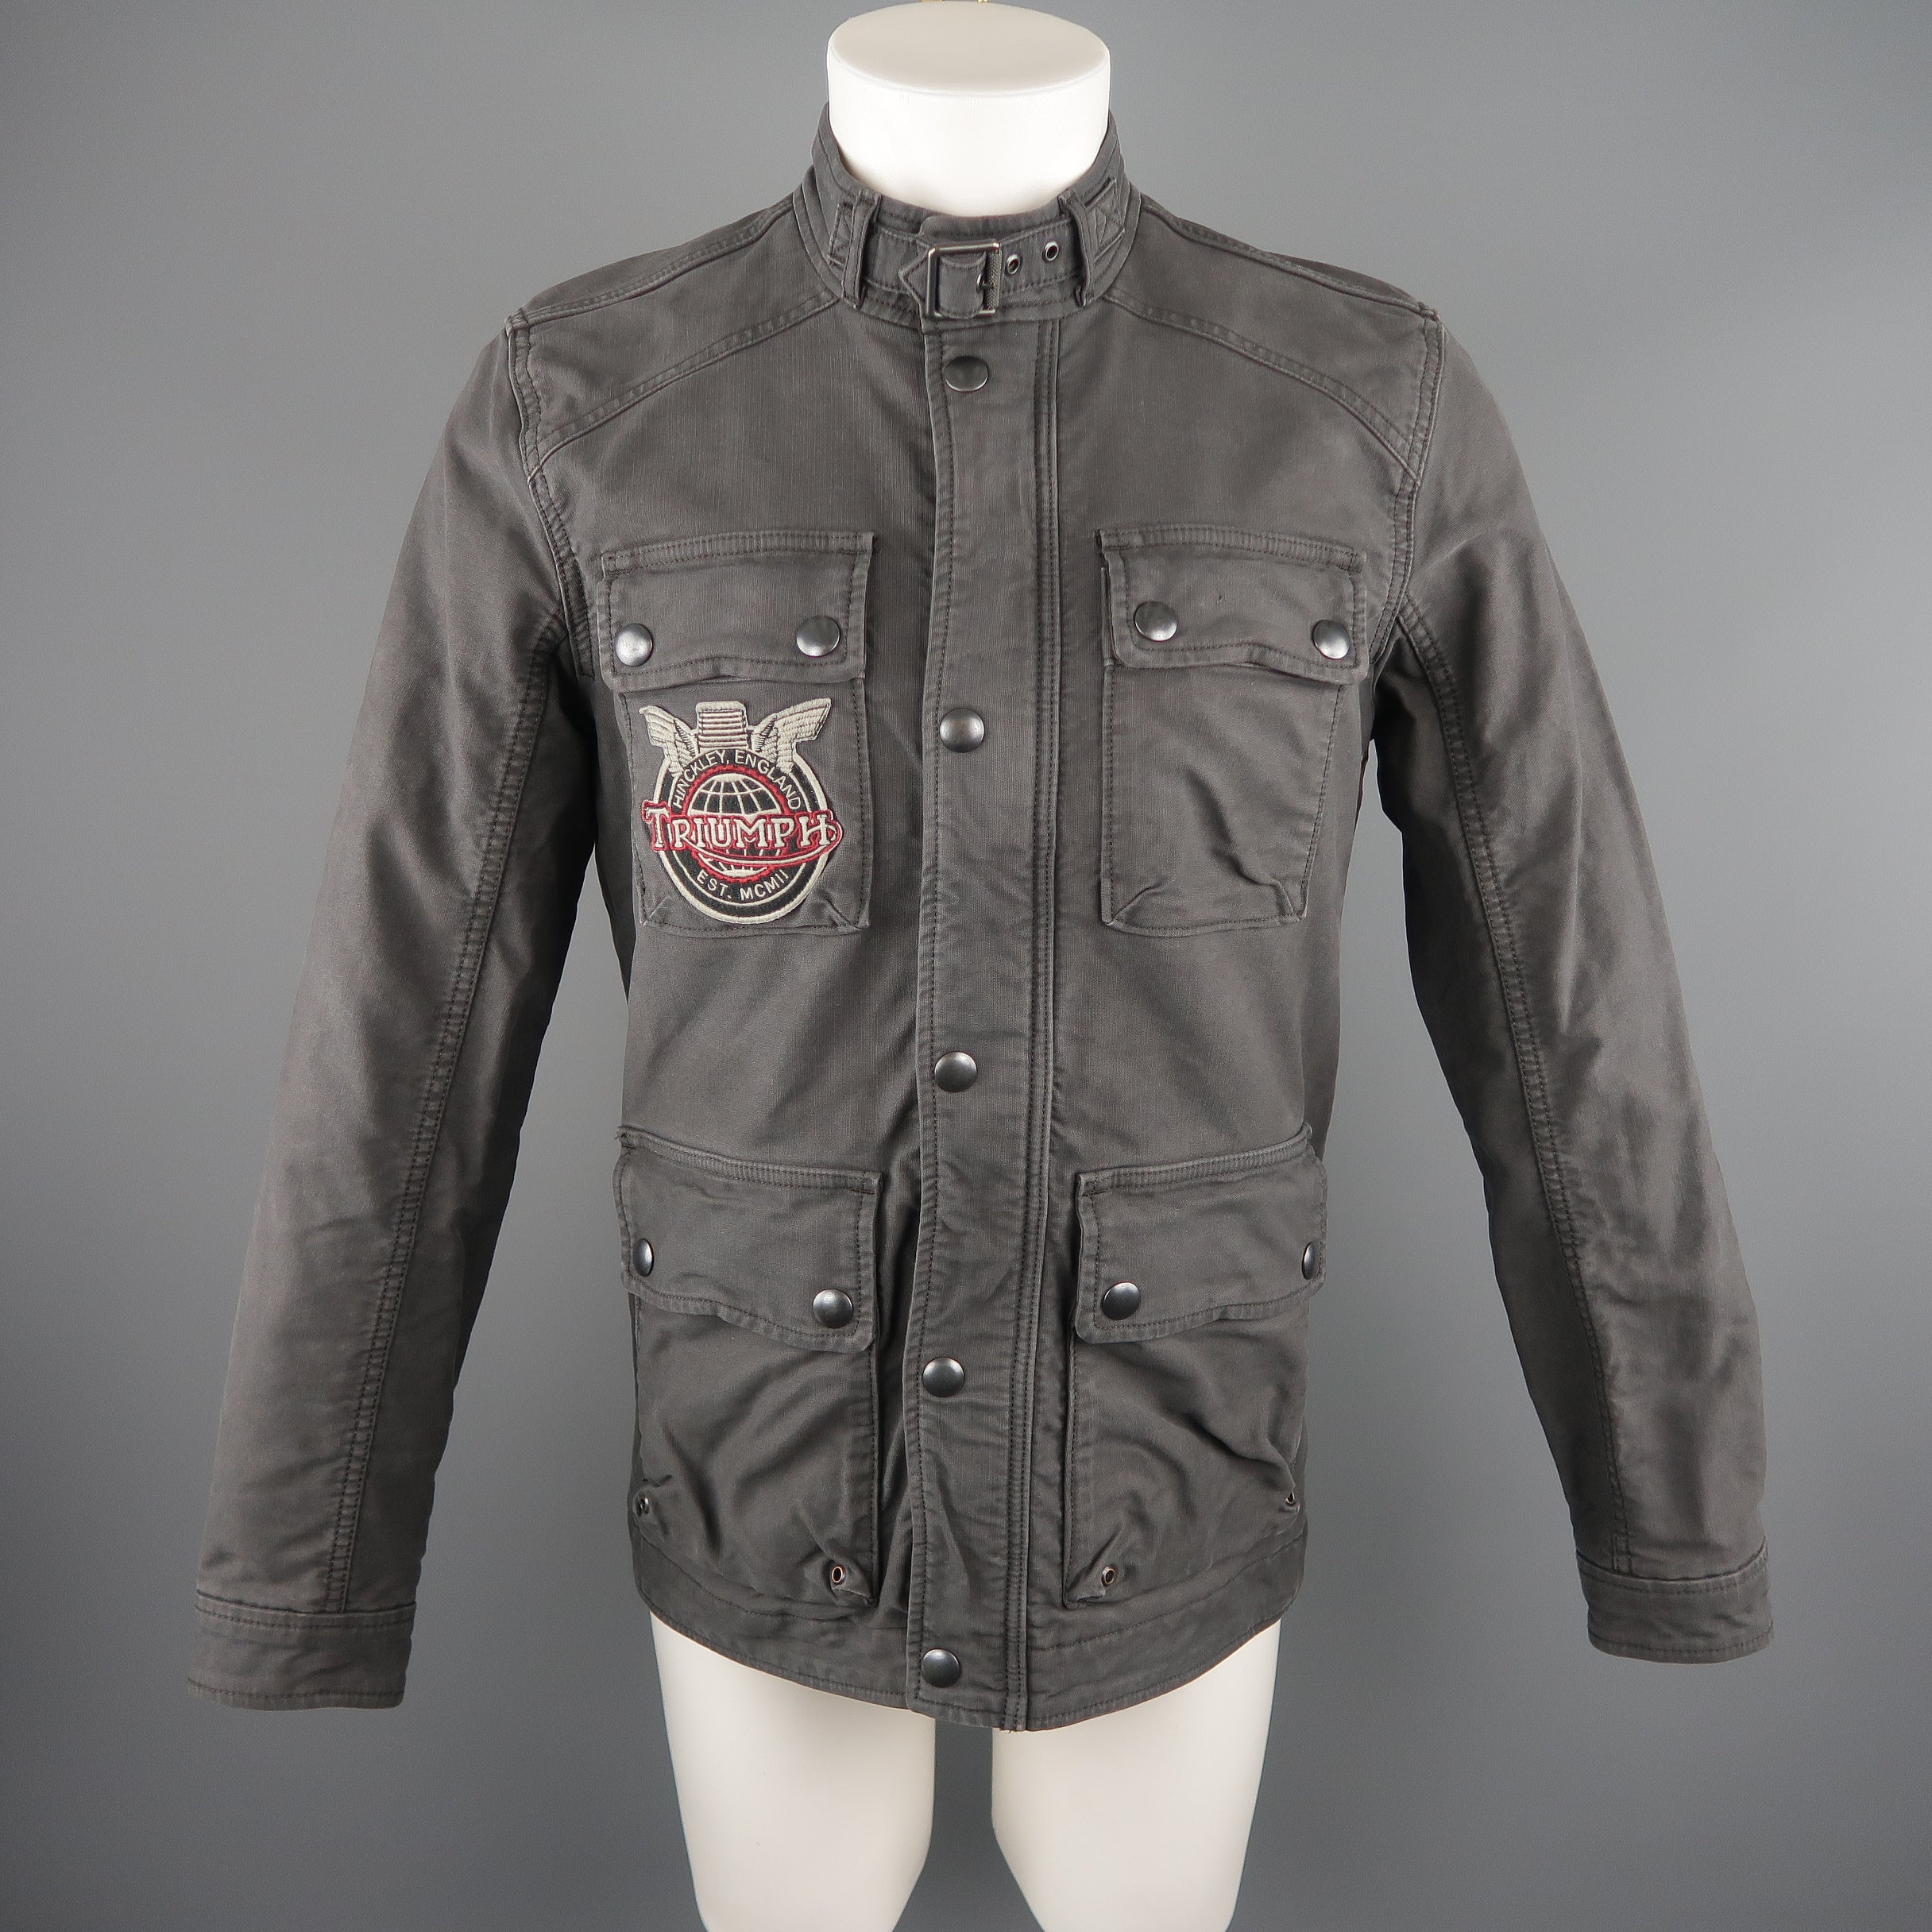 Consignment Sui for Motorcycle Jacket Designer TRIUMPH – LUCKY S Gray Generis BRAND